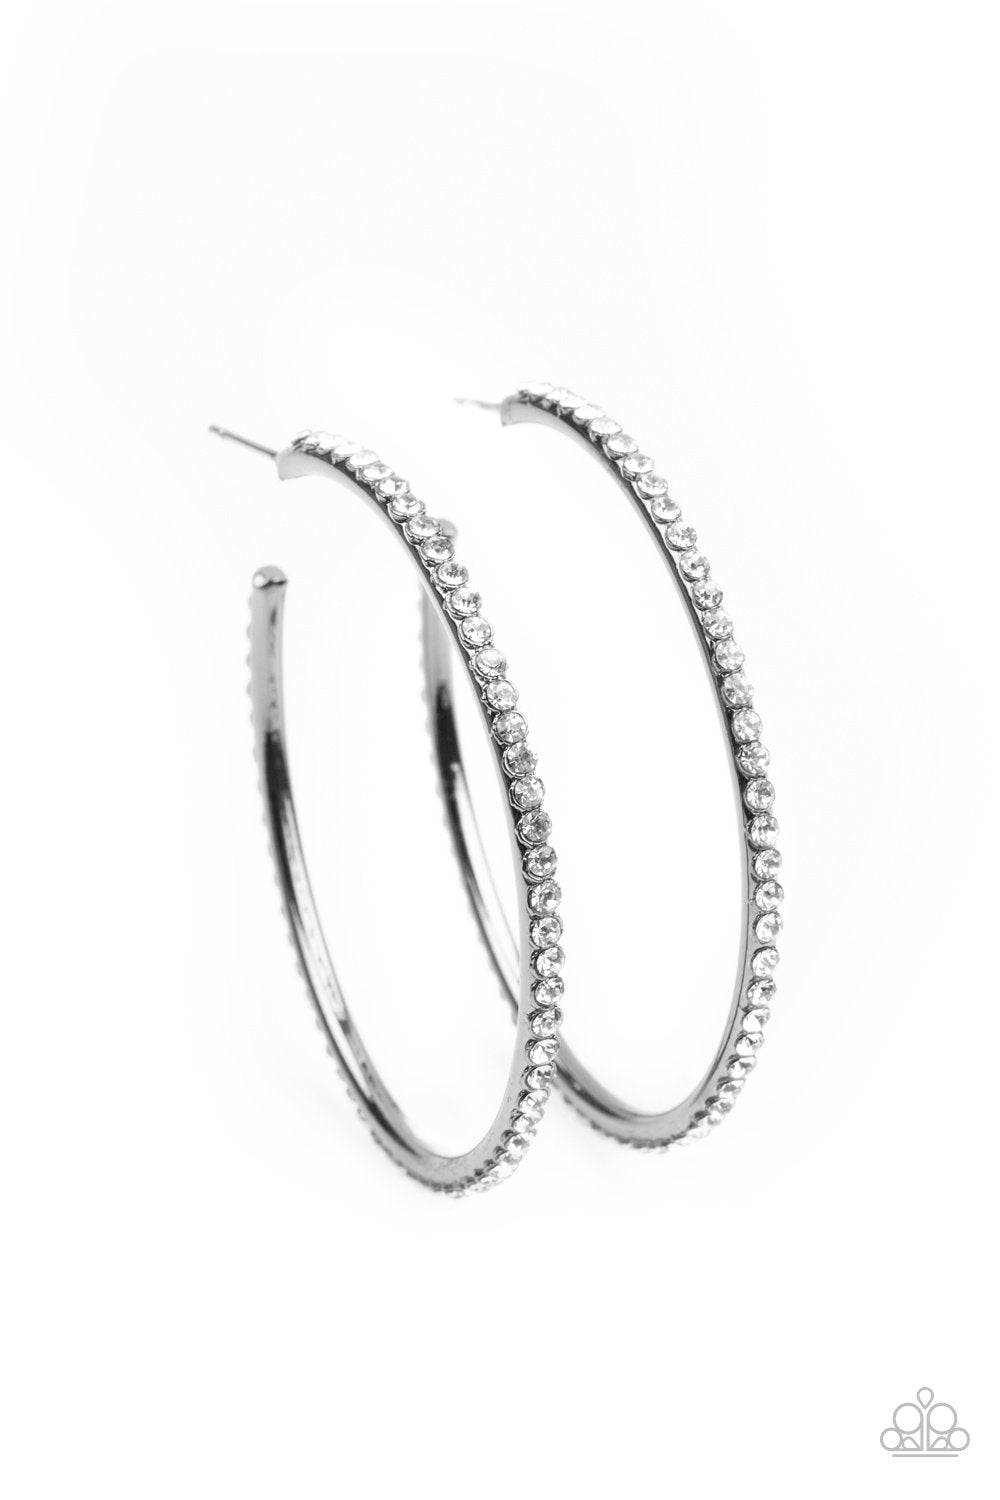 By Popular Vote Gunmetal Black and White Rhinestone Hoop Earrings - Paparazzi Accessories- lightbox - CarasShop.com - $5 Jewelry by Cara Jewels